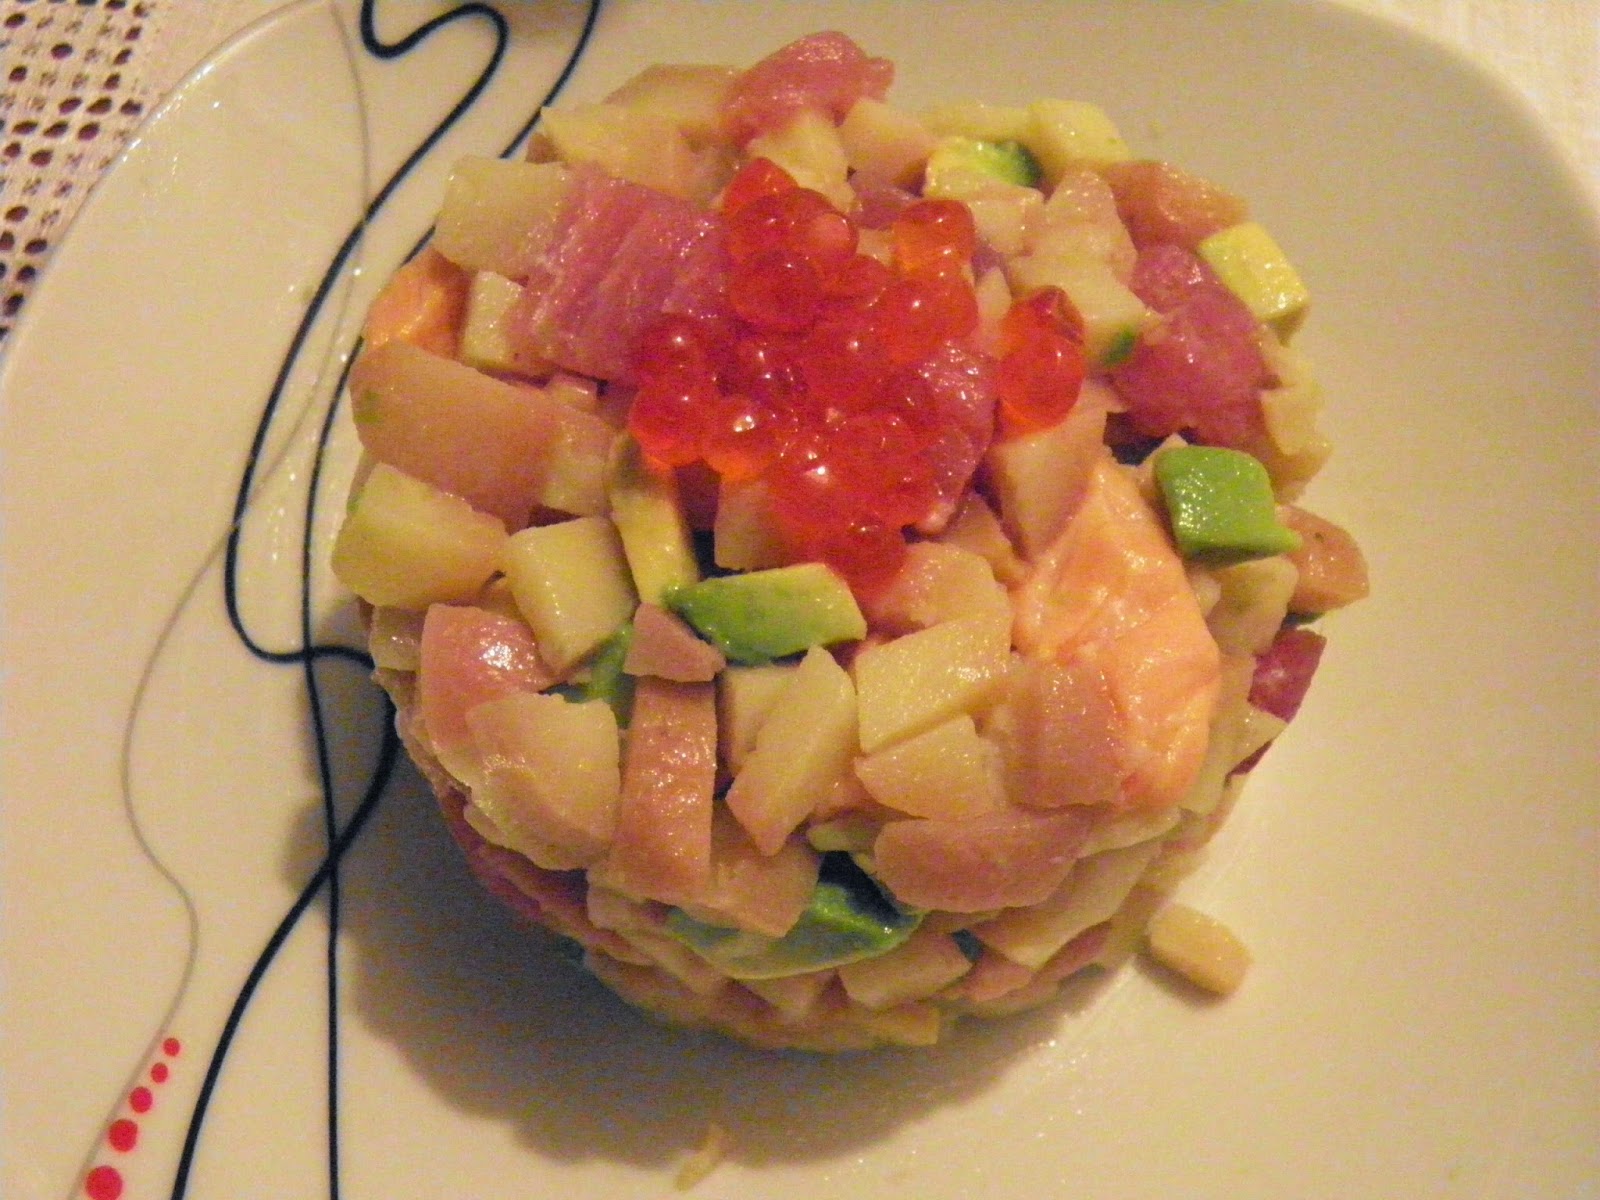 Timbal De Patata, Salmón Y Aguacate
